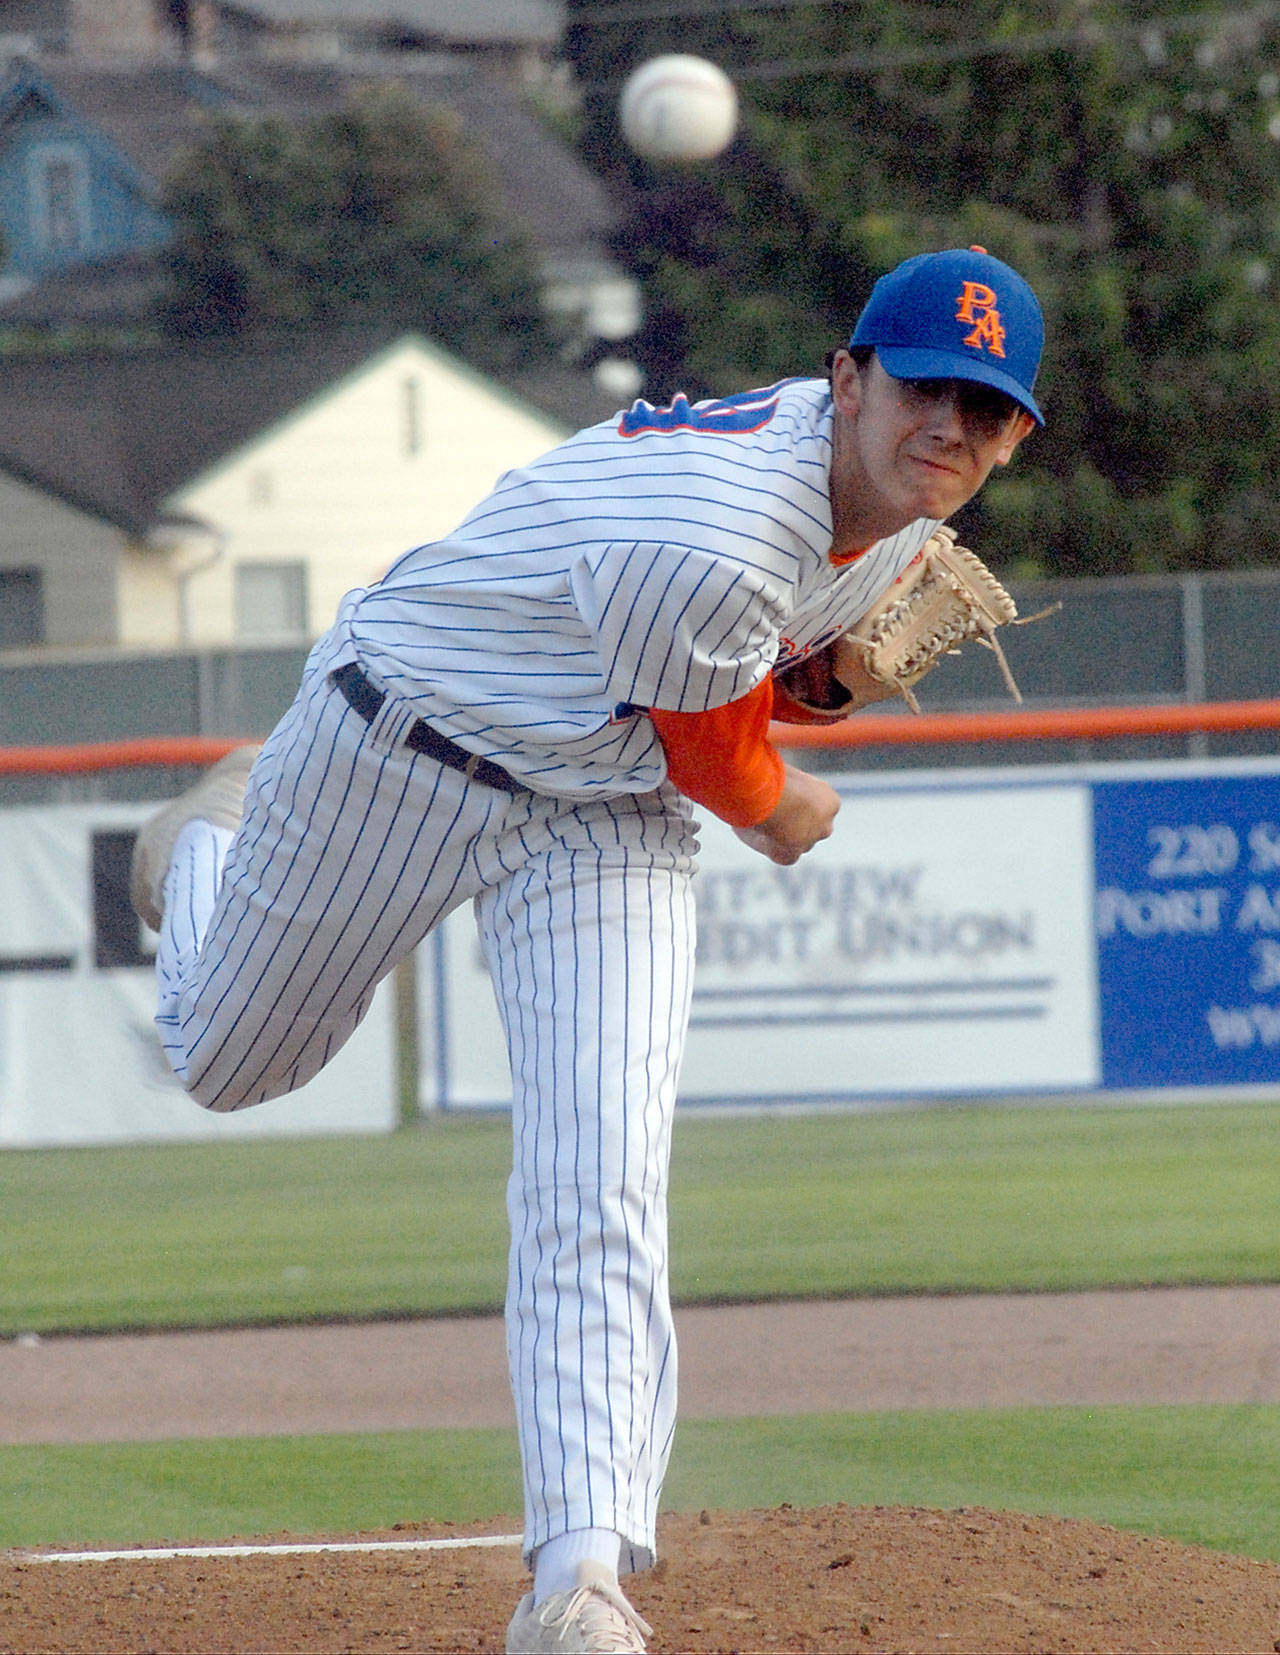 Lefties pitcher Jack Schlotman throws during an August 2019 game against Portland at Civic Field in Port Angeles. (Keith Thorpe/Peninsula Daily News file)